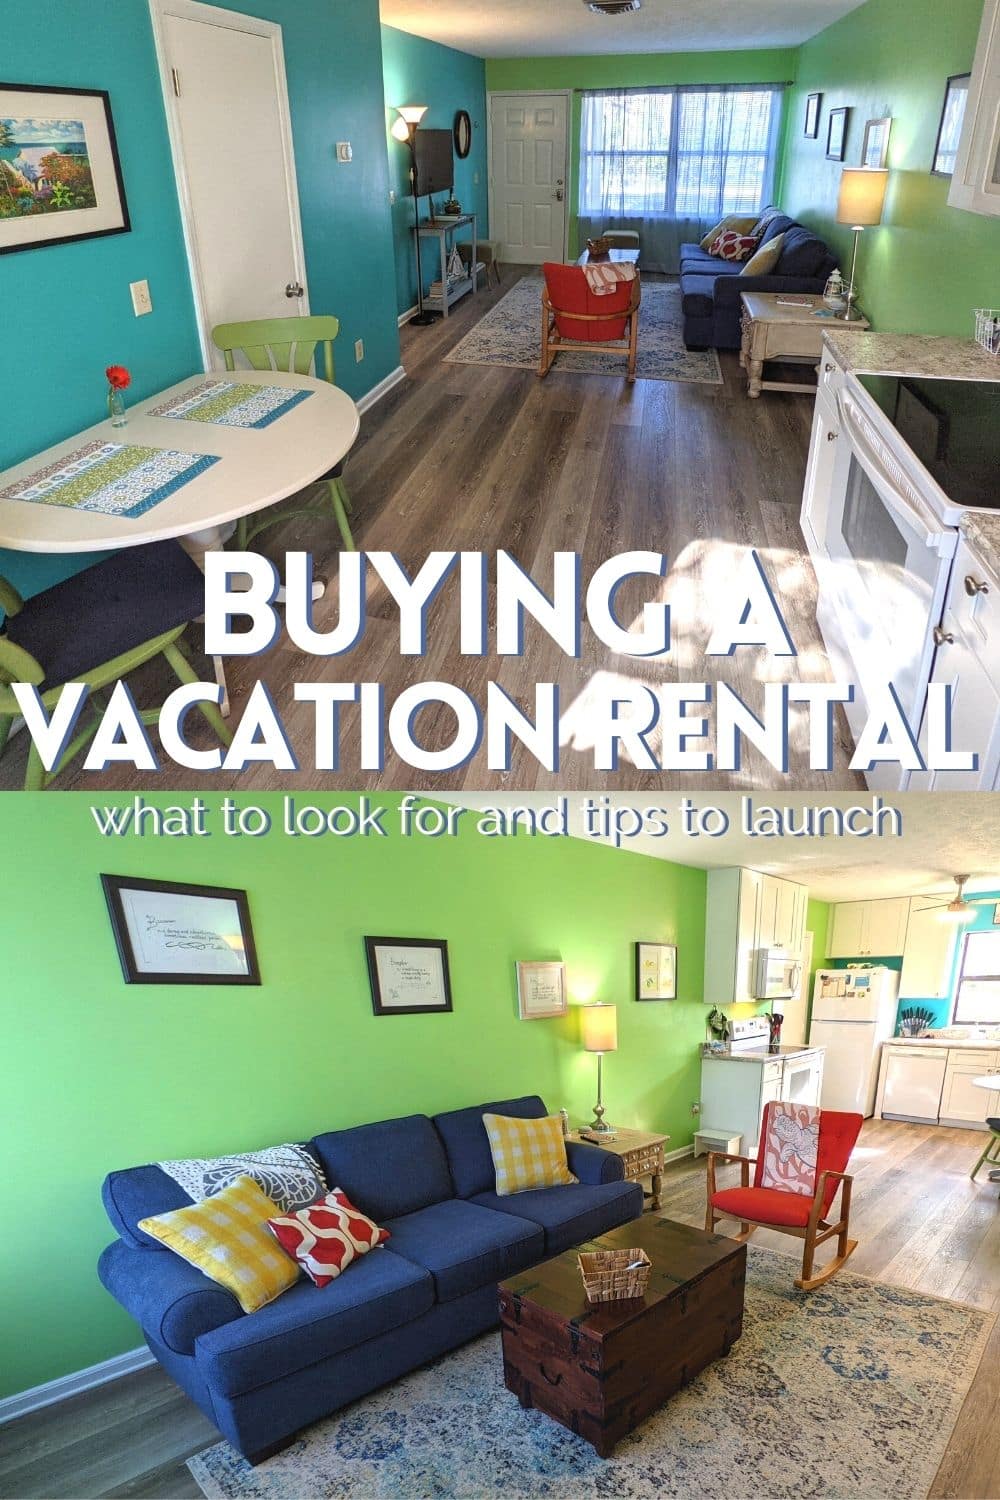 Buying a vacation rental can be complicated. We bought, fixed up, and ran a profitable short term rental in less than a month. Here's how we did it and tips for running a successful vacation rental in Florida (or anywhere).